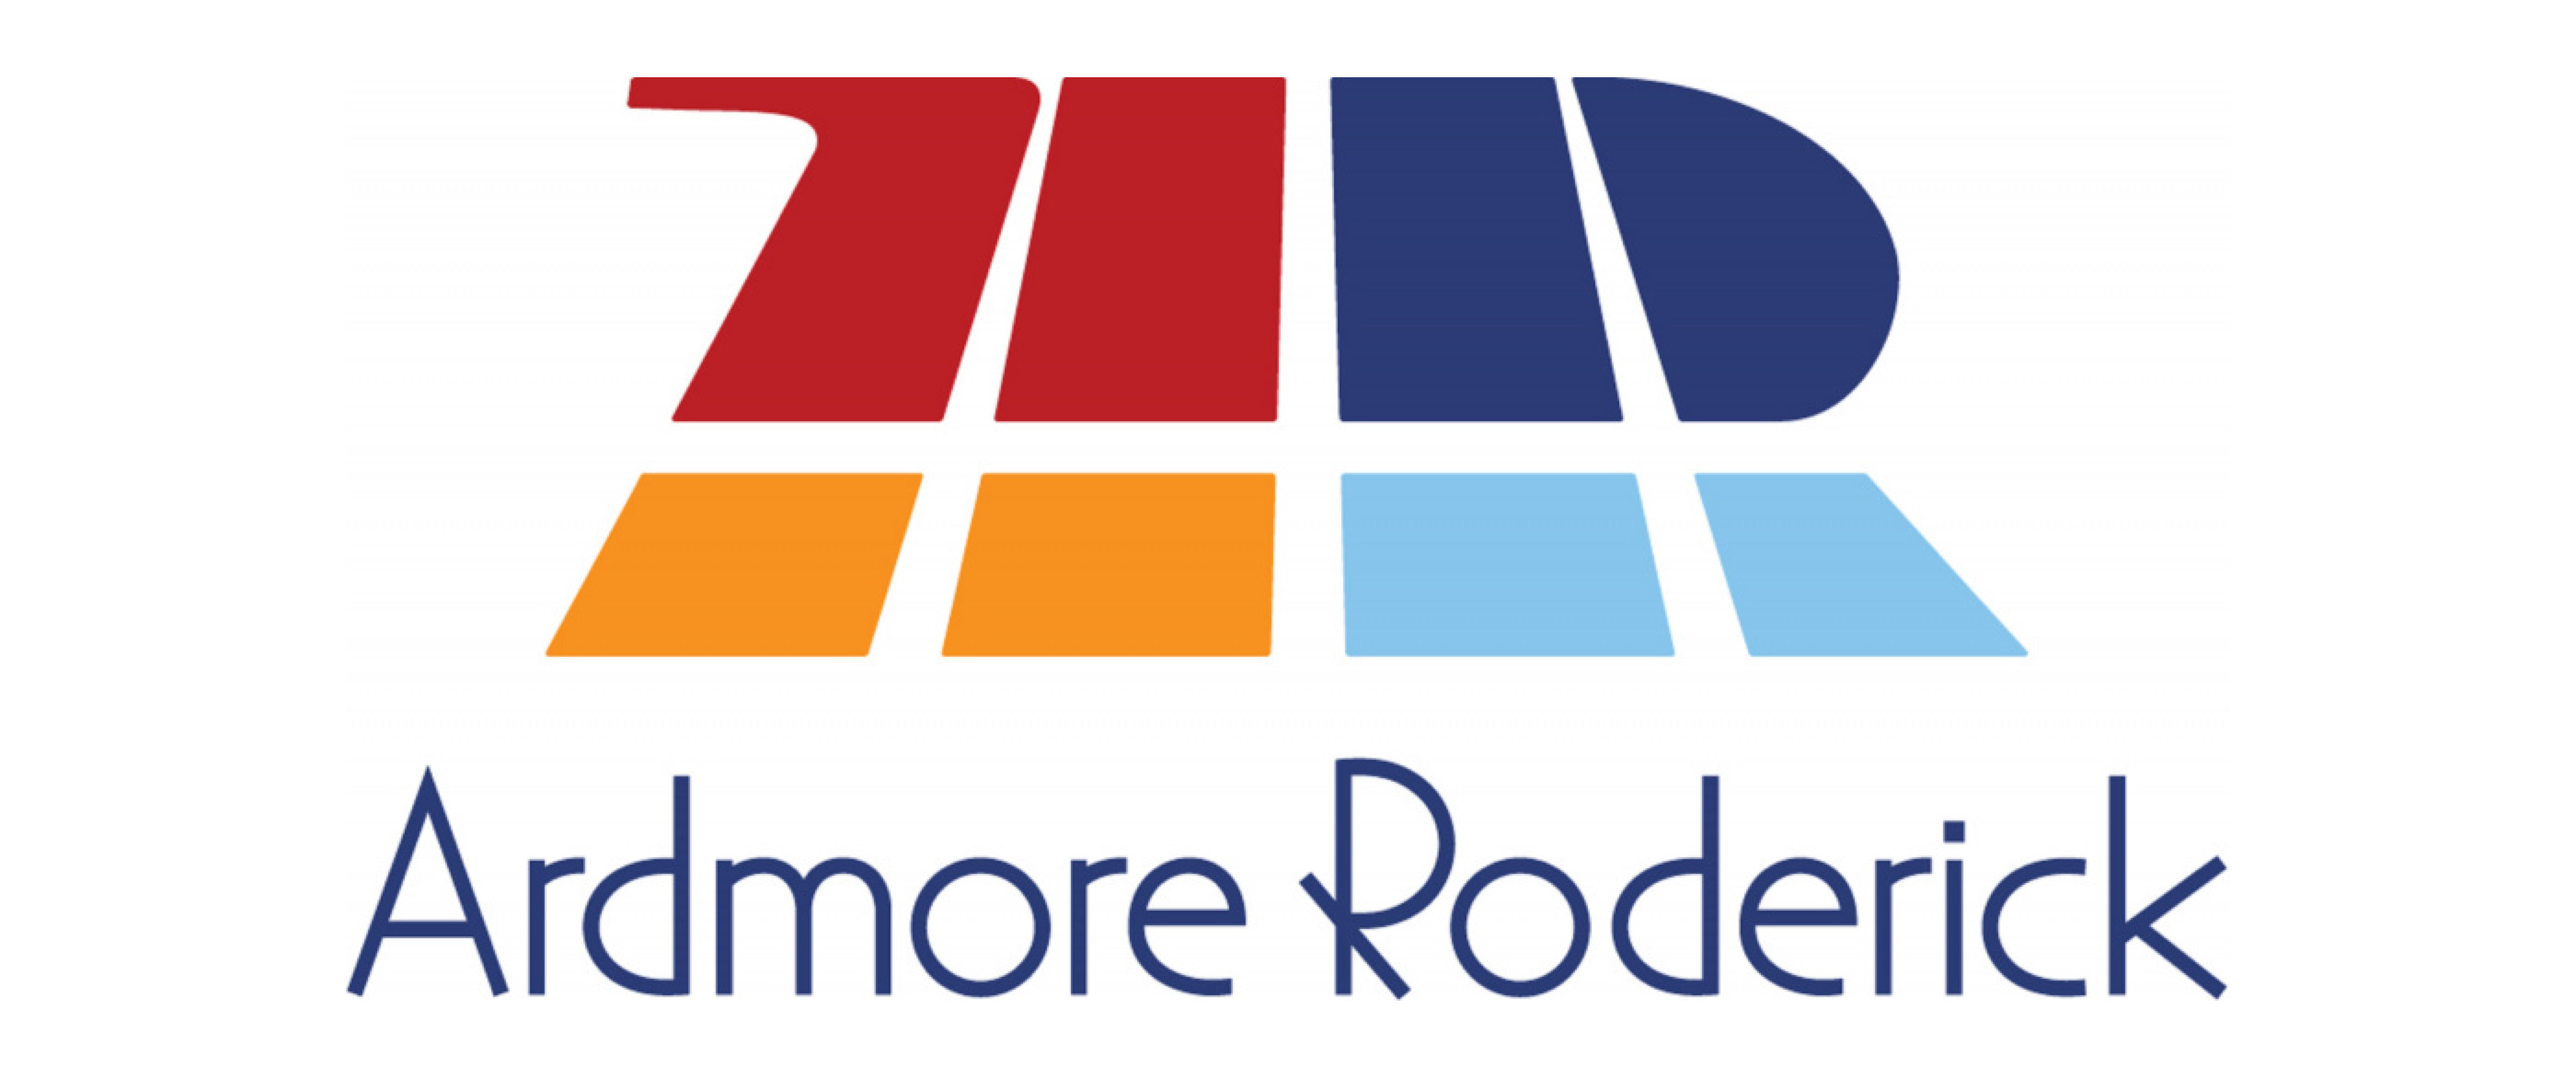 Illinois State Toll Highway Authority Selects Ardmore Roderick for Facilities Construction Management